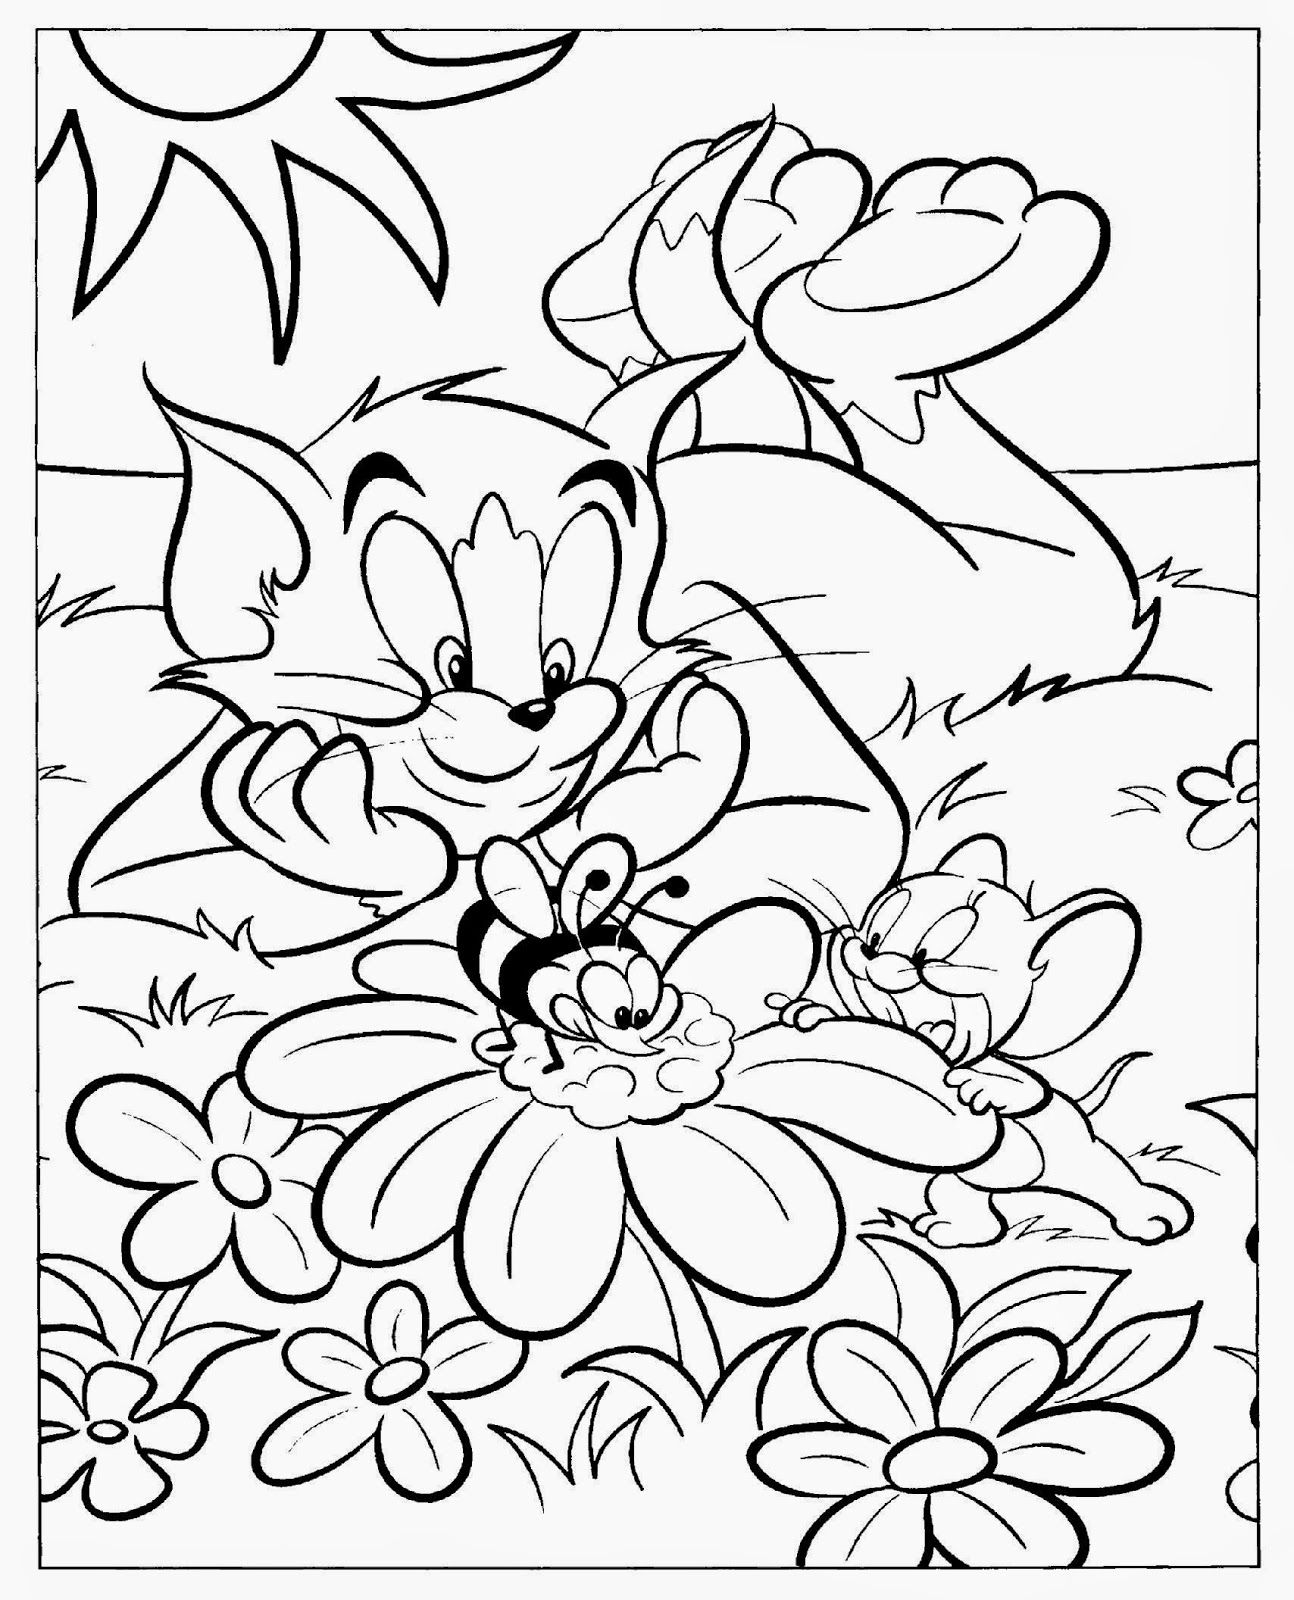 free-coloring-pages-cartoon-network-download-free-coloring-pages